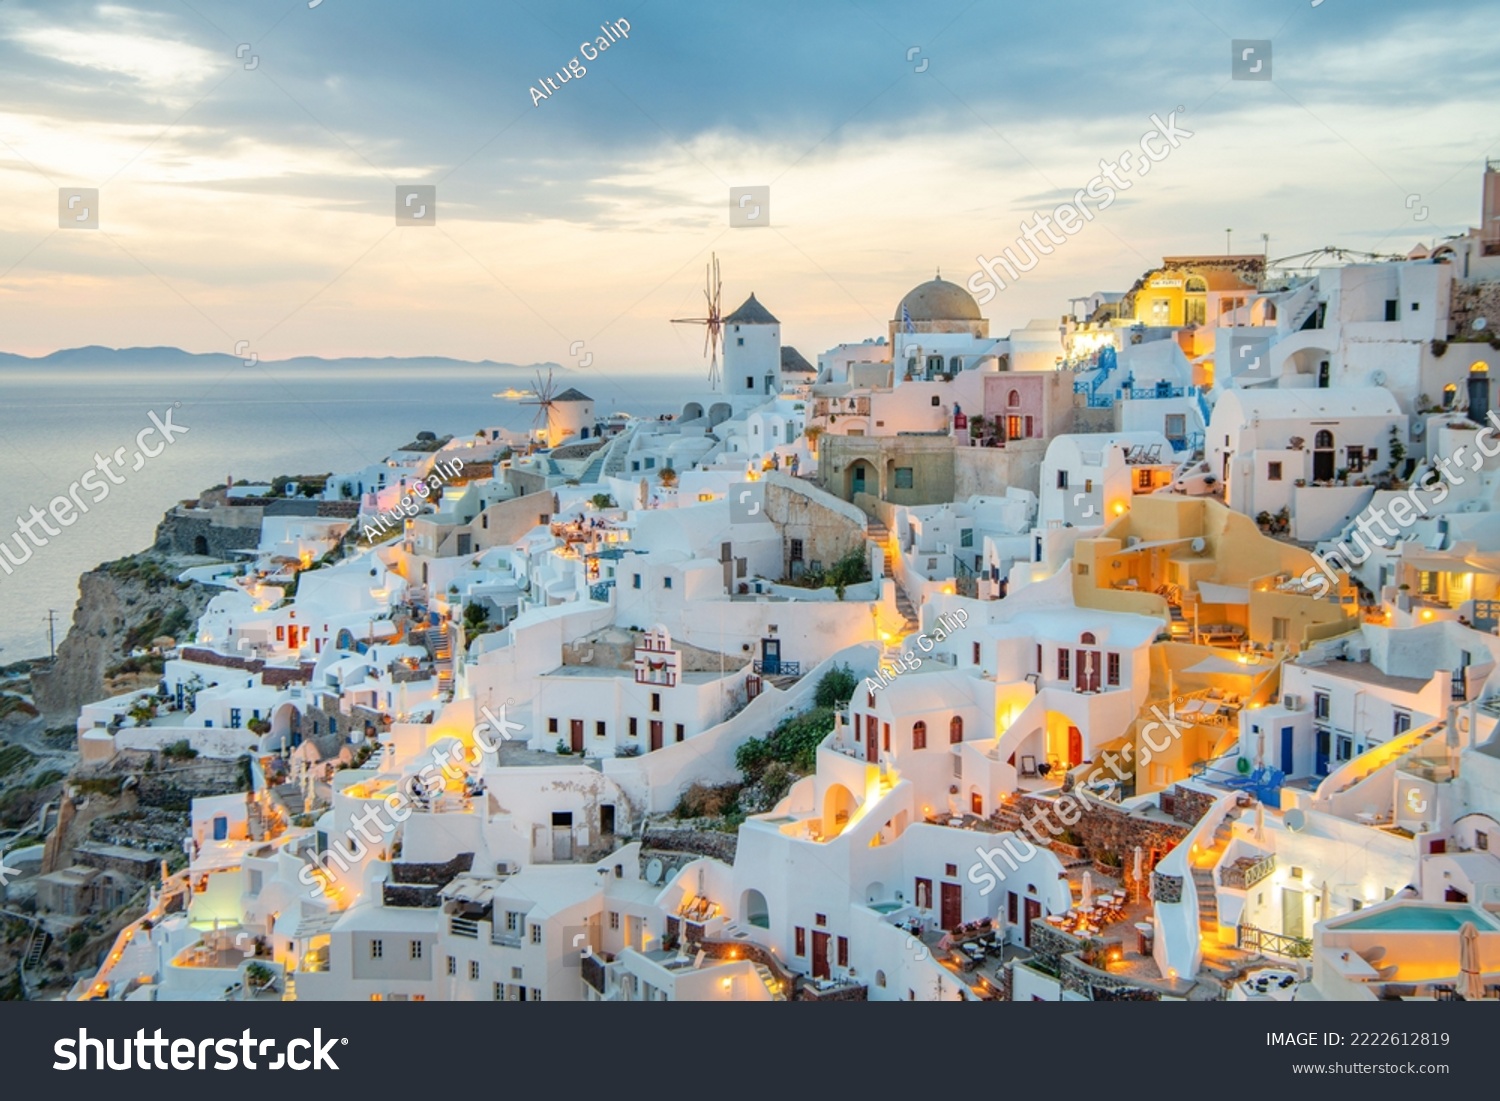 Scenic view of traditional cycladic white houses and blue domes in Oia village, Santorini island, Greece #2222612819